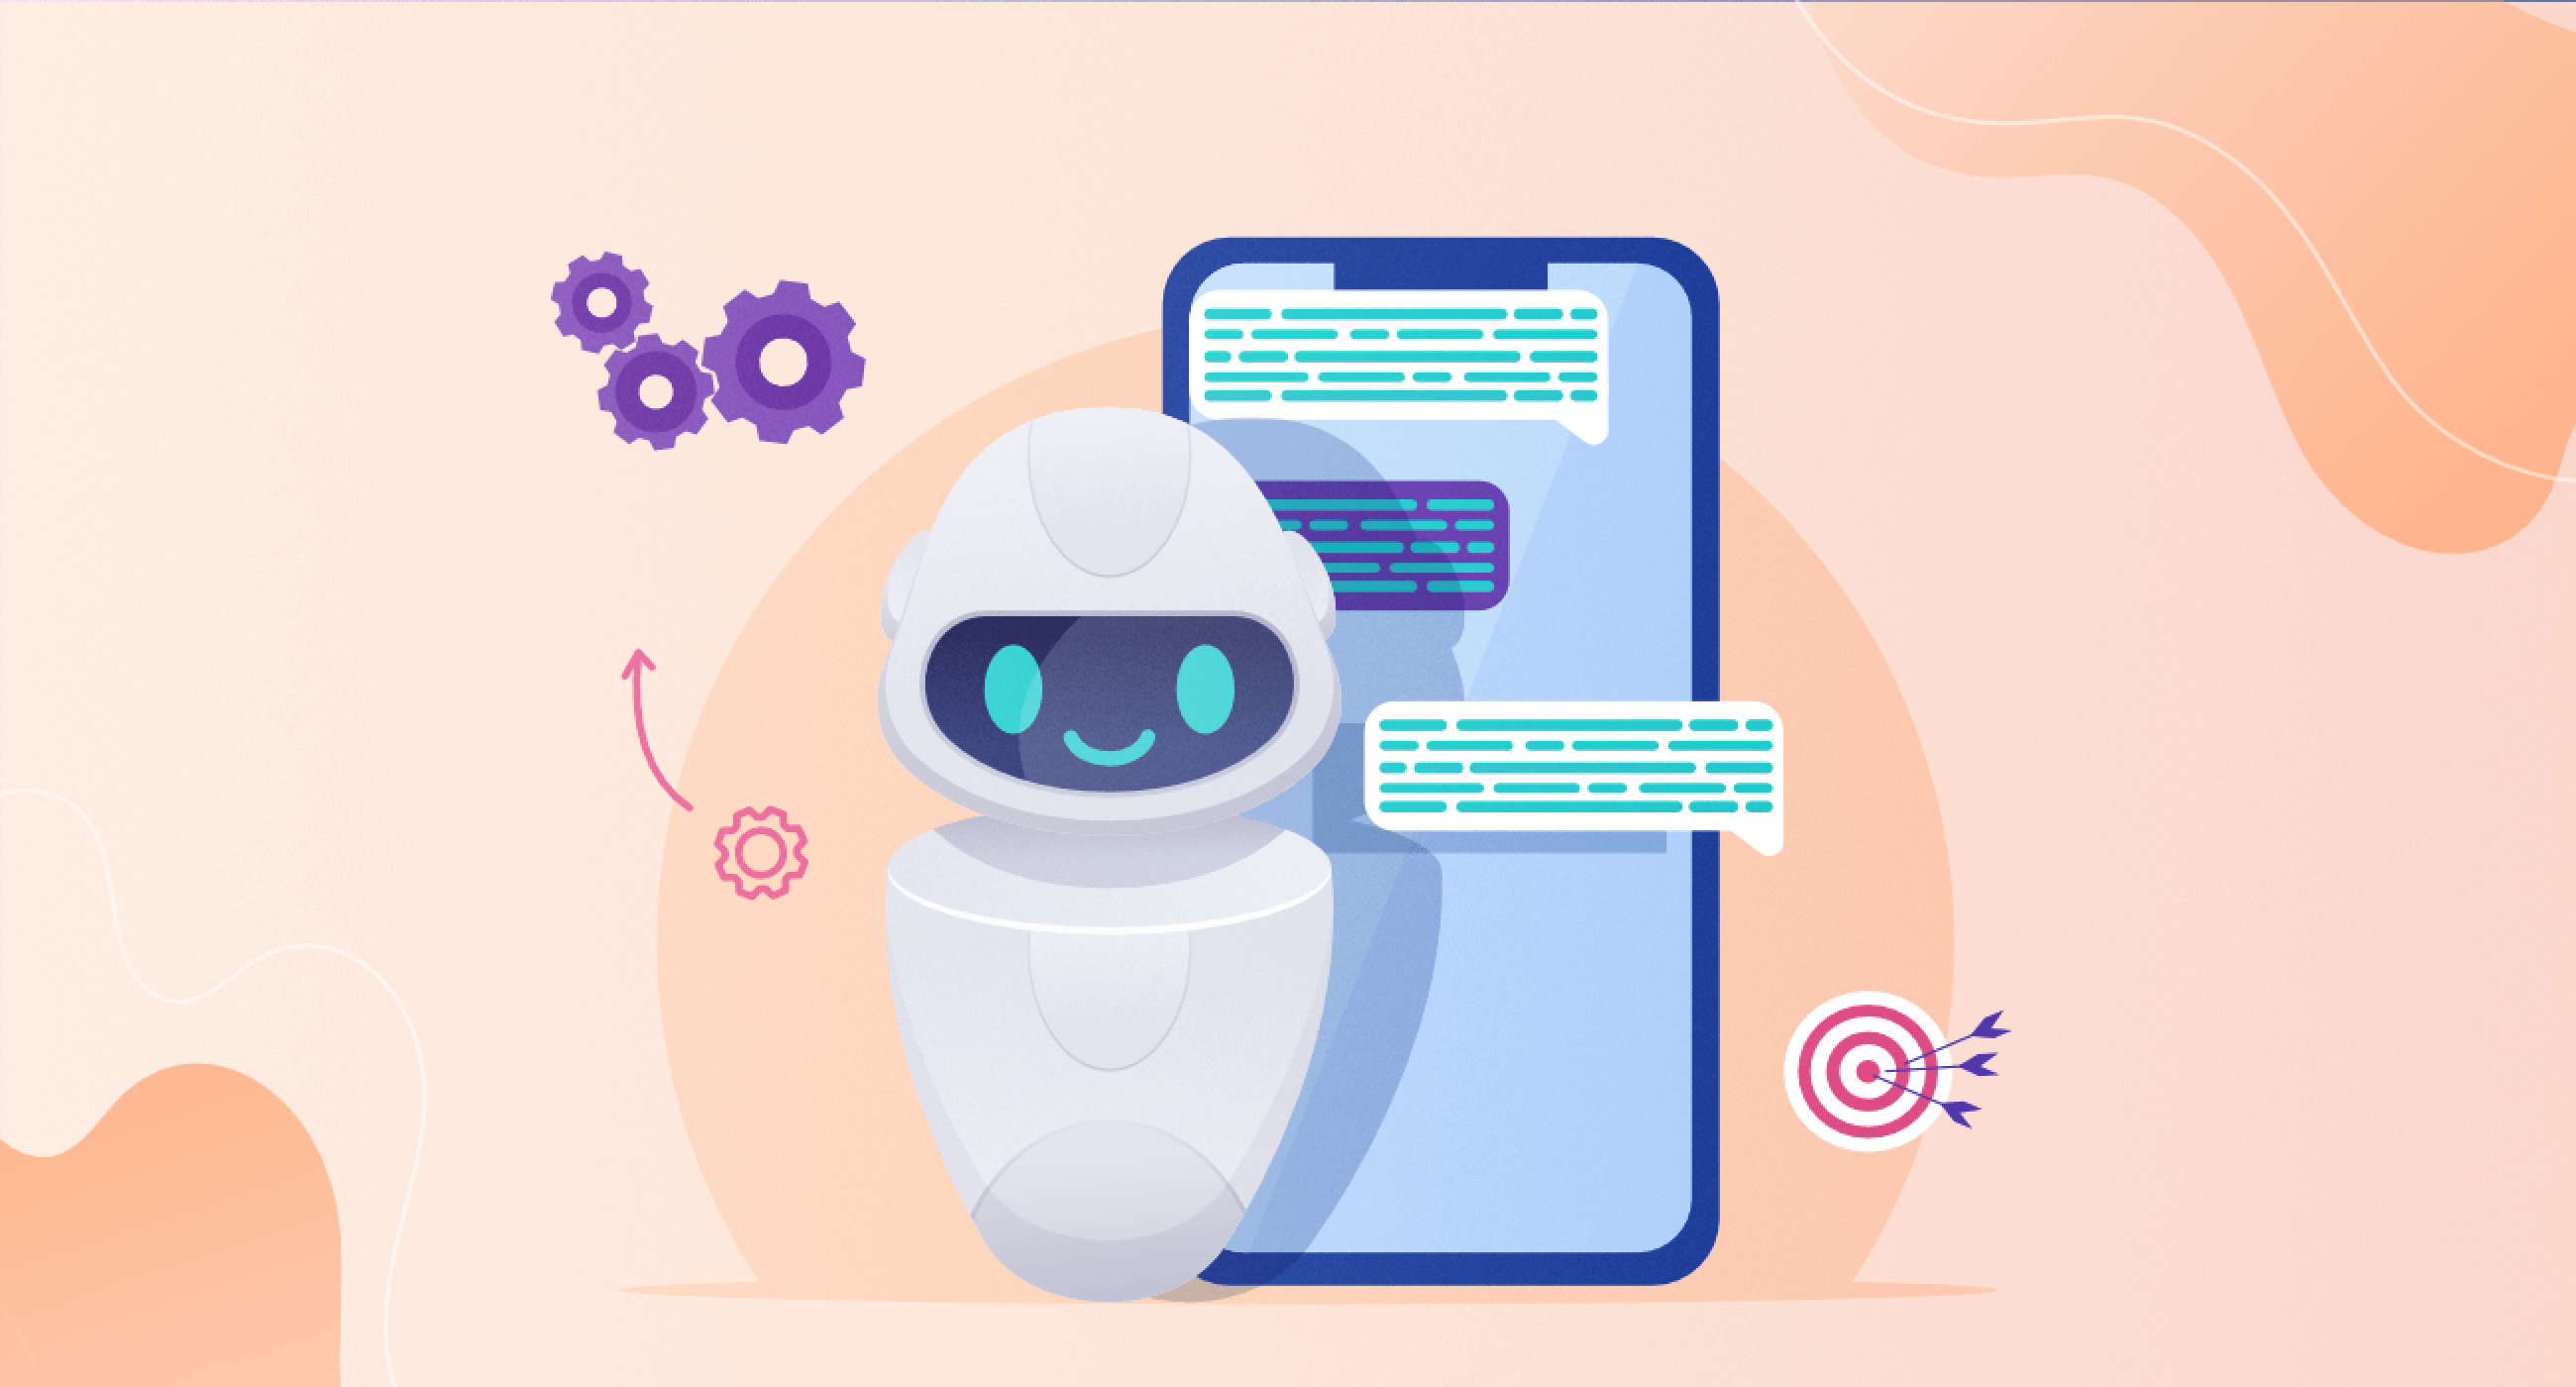 Can Chatbots become an indispensable tool in the corporate world?